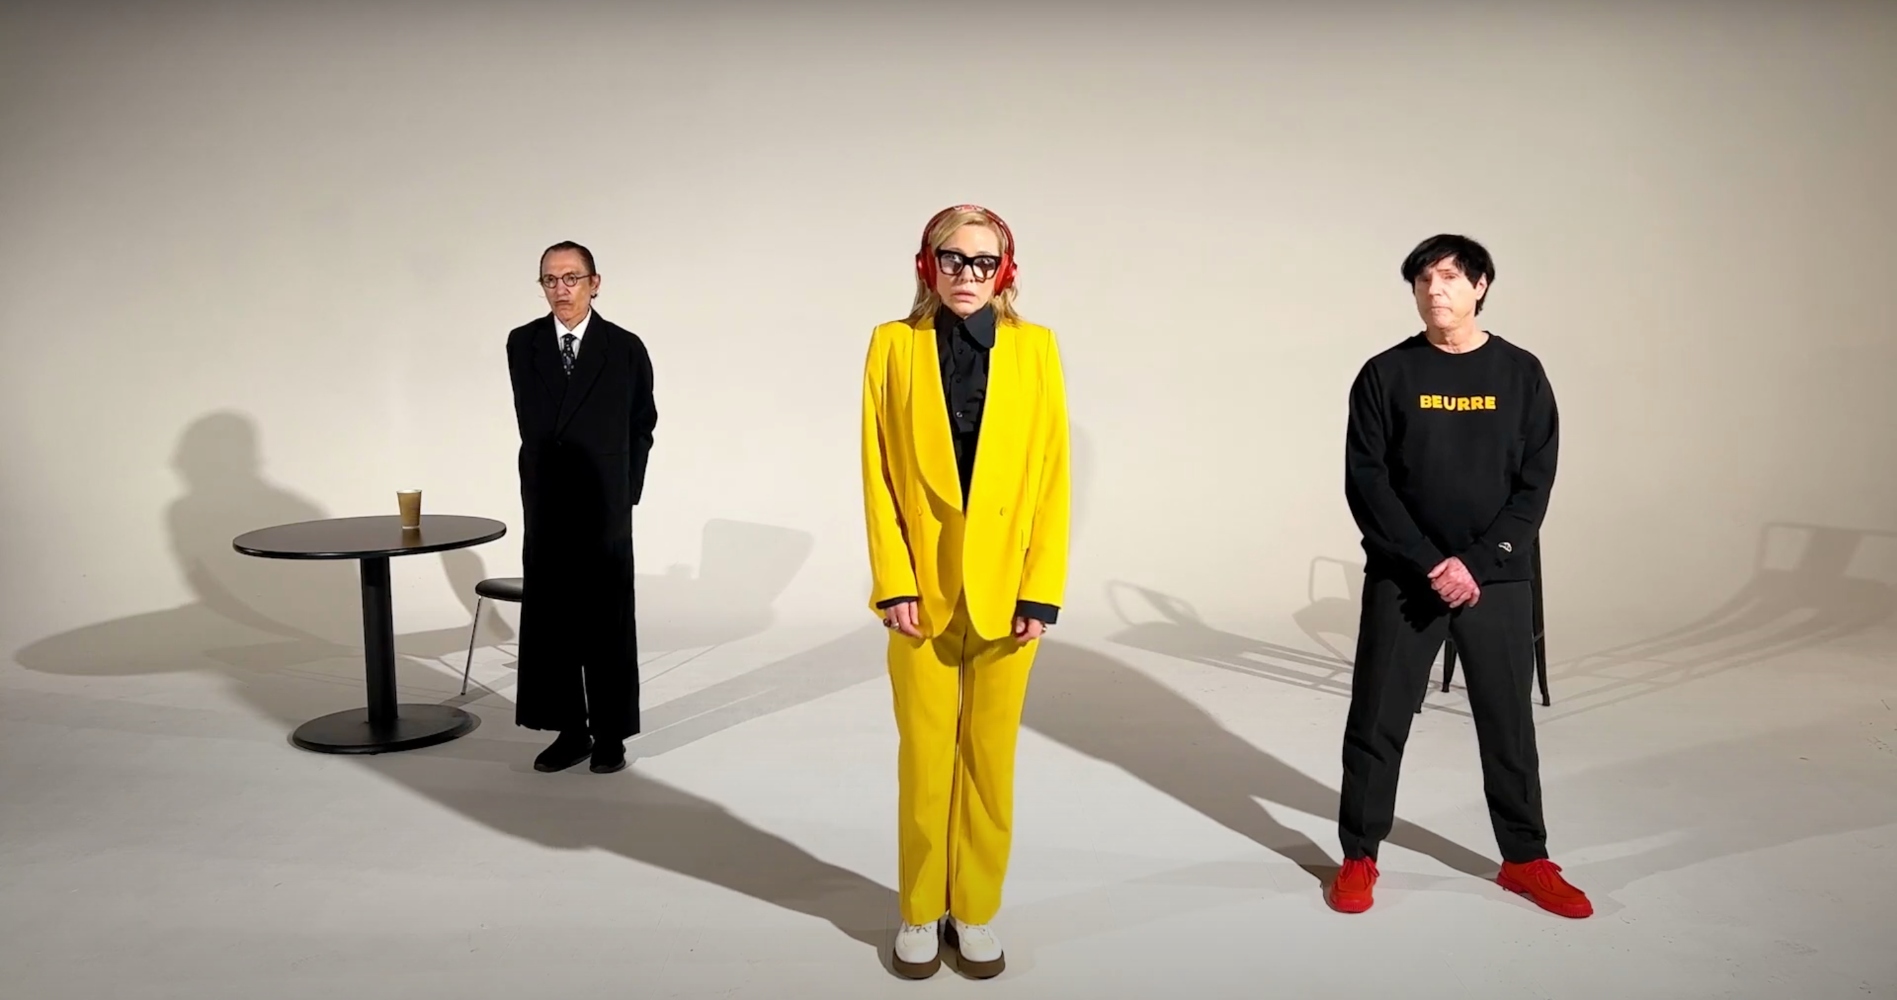 Cate Blanchett Dances Through It In Video for Sparks’ New Single “The Girl Is Crying In Her Latte”